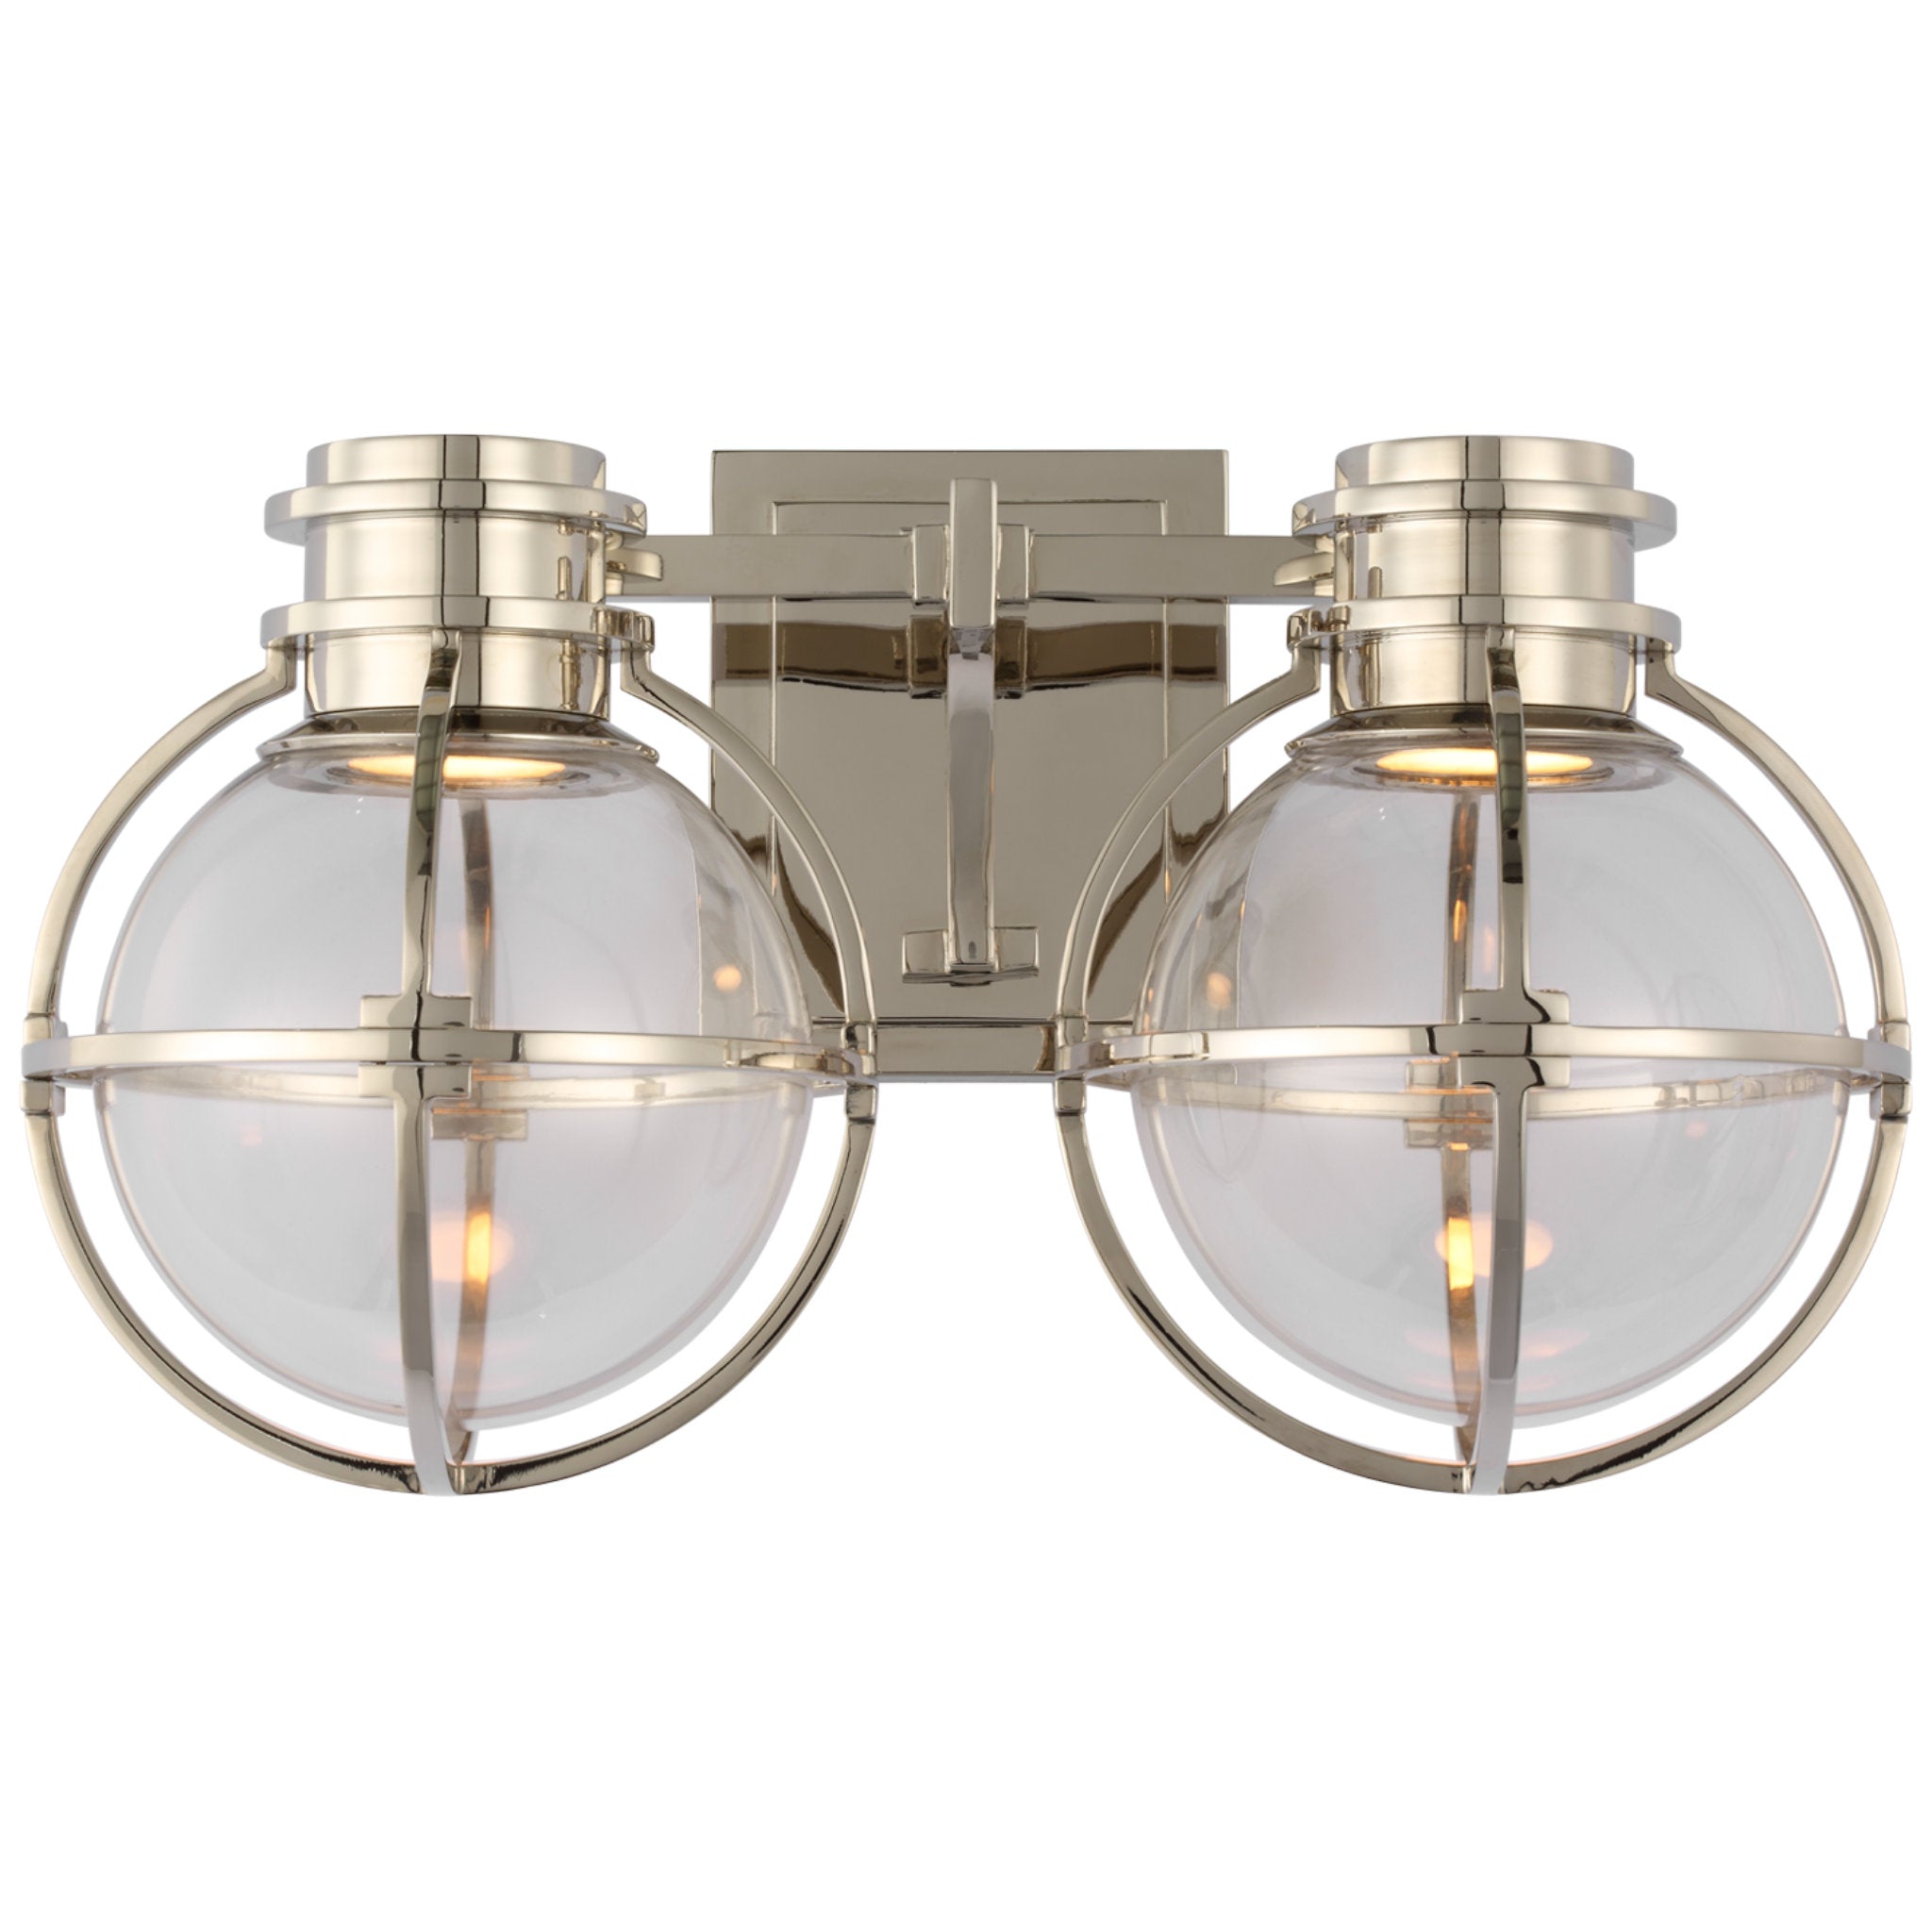 Chapman & Myers Gracie Double Sconce in Polished Nickel with Clear Glass